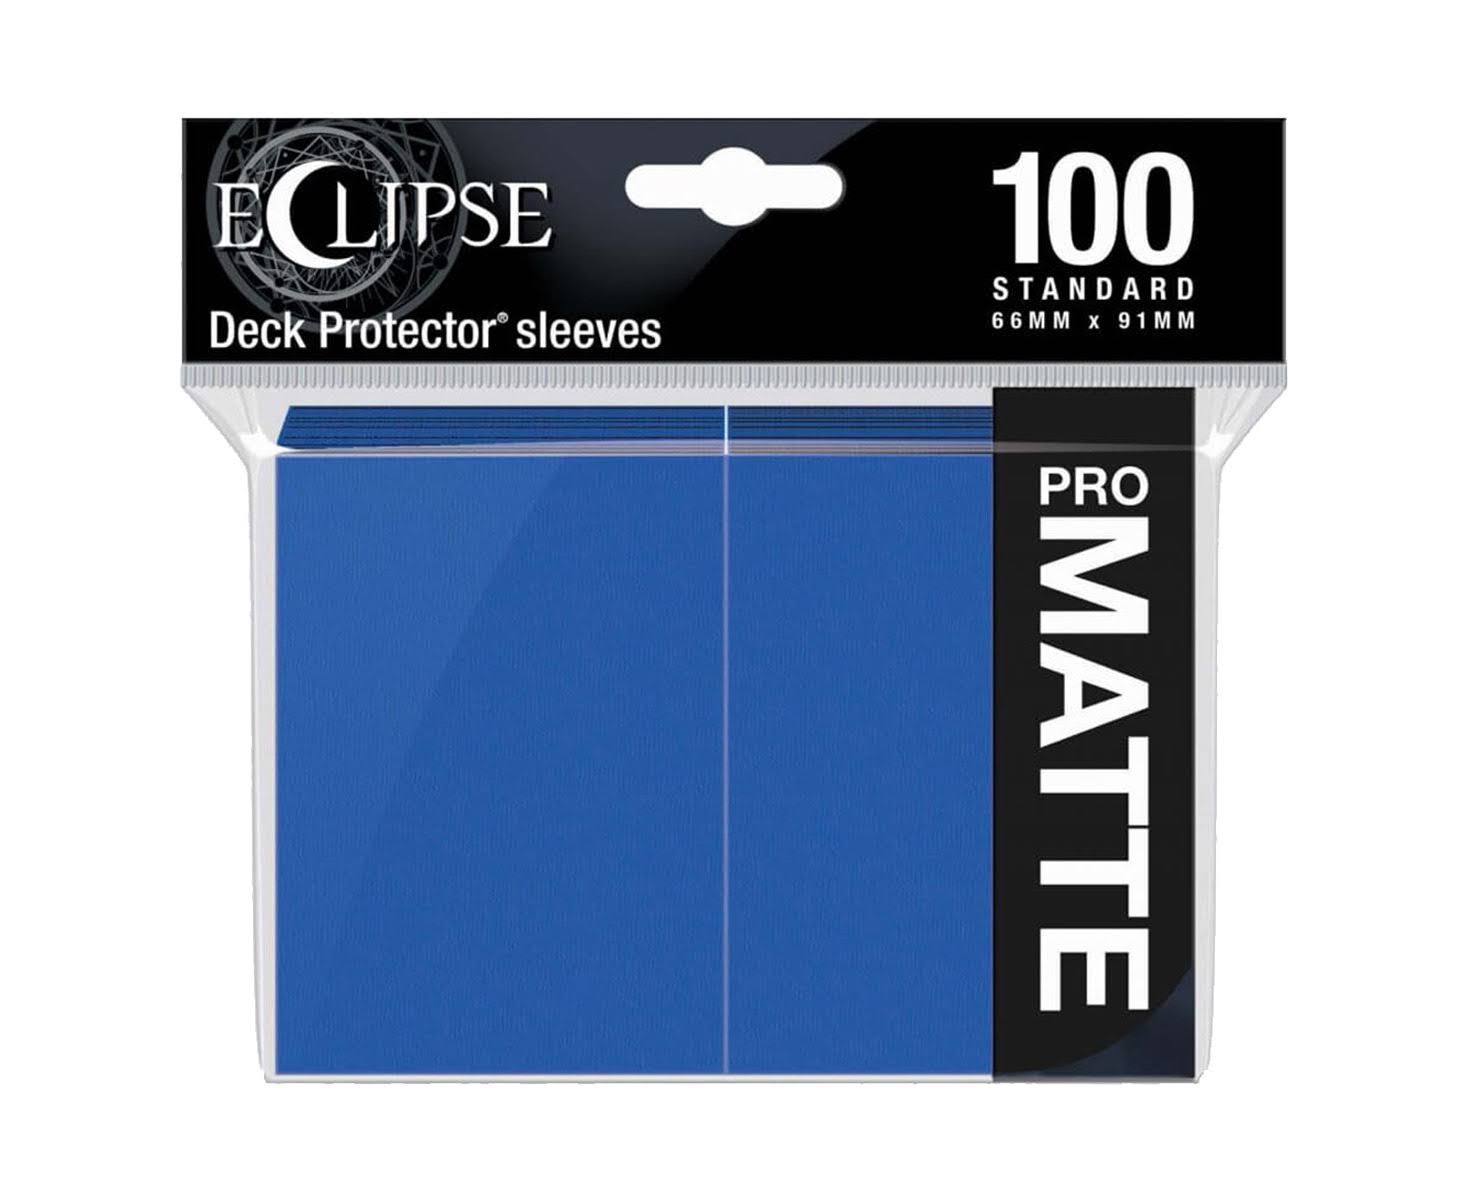 Ultra Pro Eclipse Matte Standard Sleeves (100) Pacific Blue